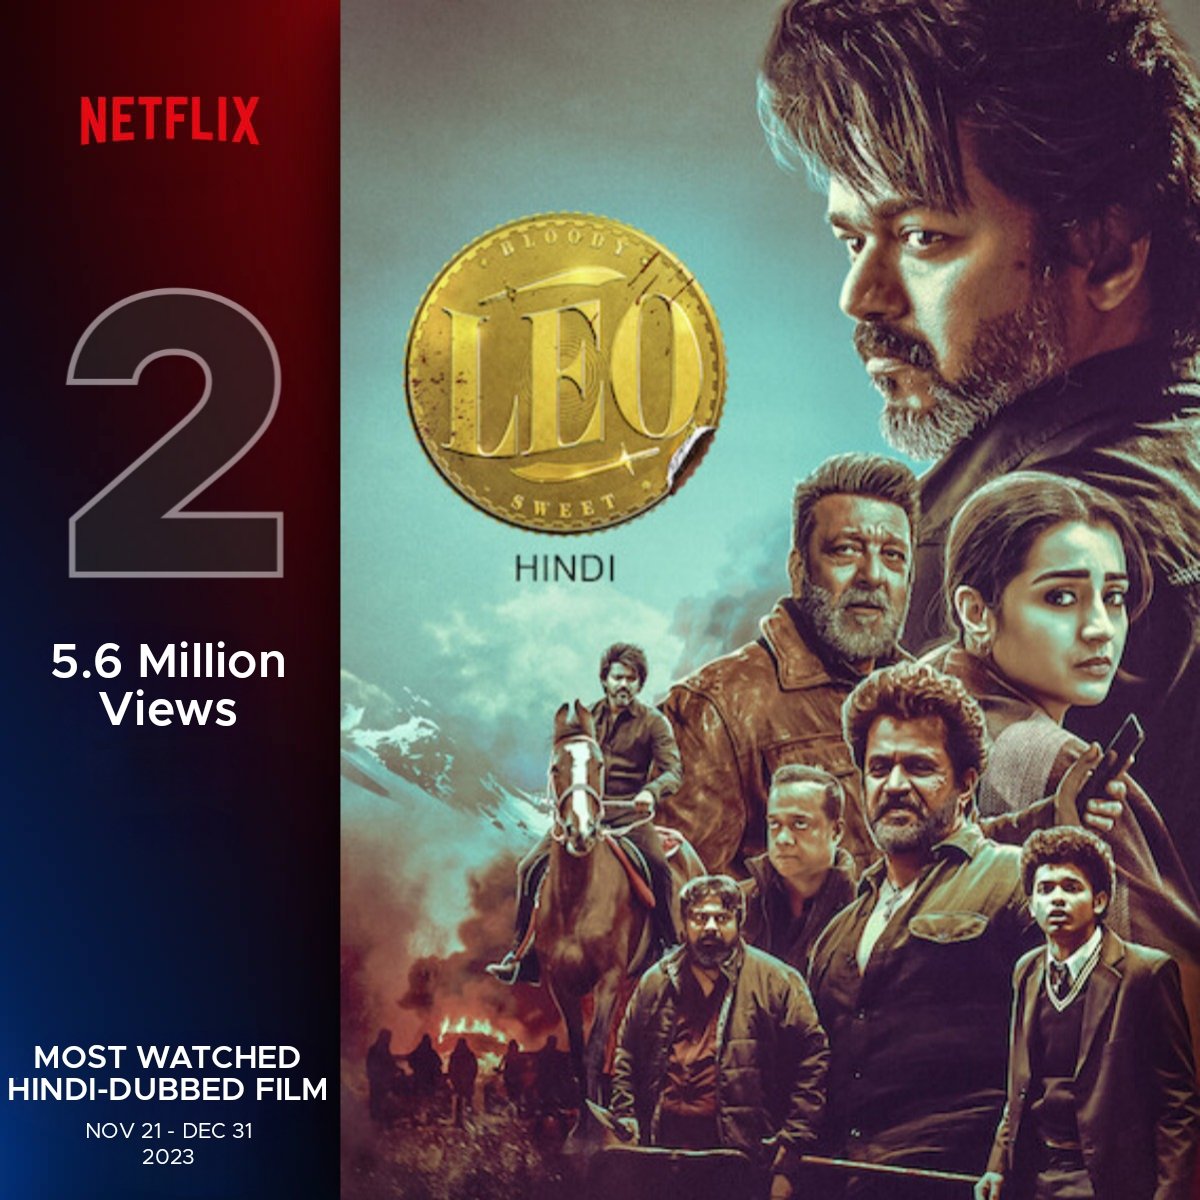 #Leo is #BloodySweet for #Netflix
Clocked 11.9M Views with 32.1M WH in 5 Weeks!!

#1 Most Watched South Indian Film
#1 Most Watched Non-Hindi Film
#4 Most Watched Indian Film

#1 Most Watched Tamil Film(4.2M)
#2 Most Watched Hindi Dub Film(5.6M)
#3 Most Watched WatchHour Film